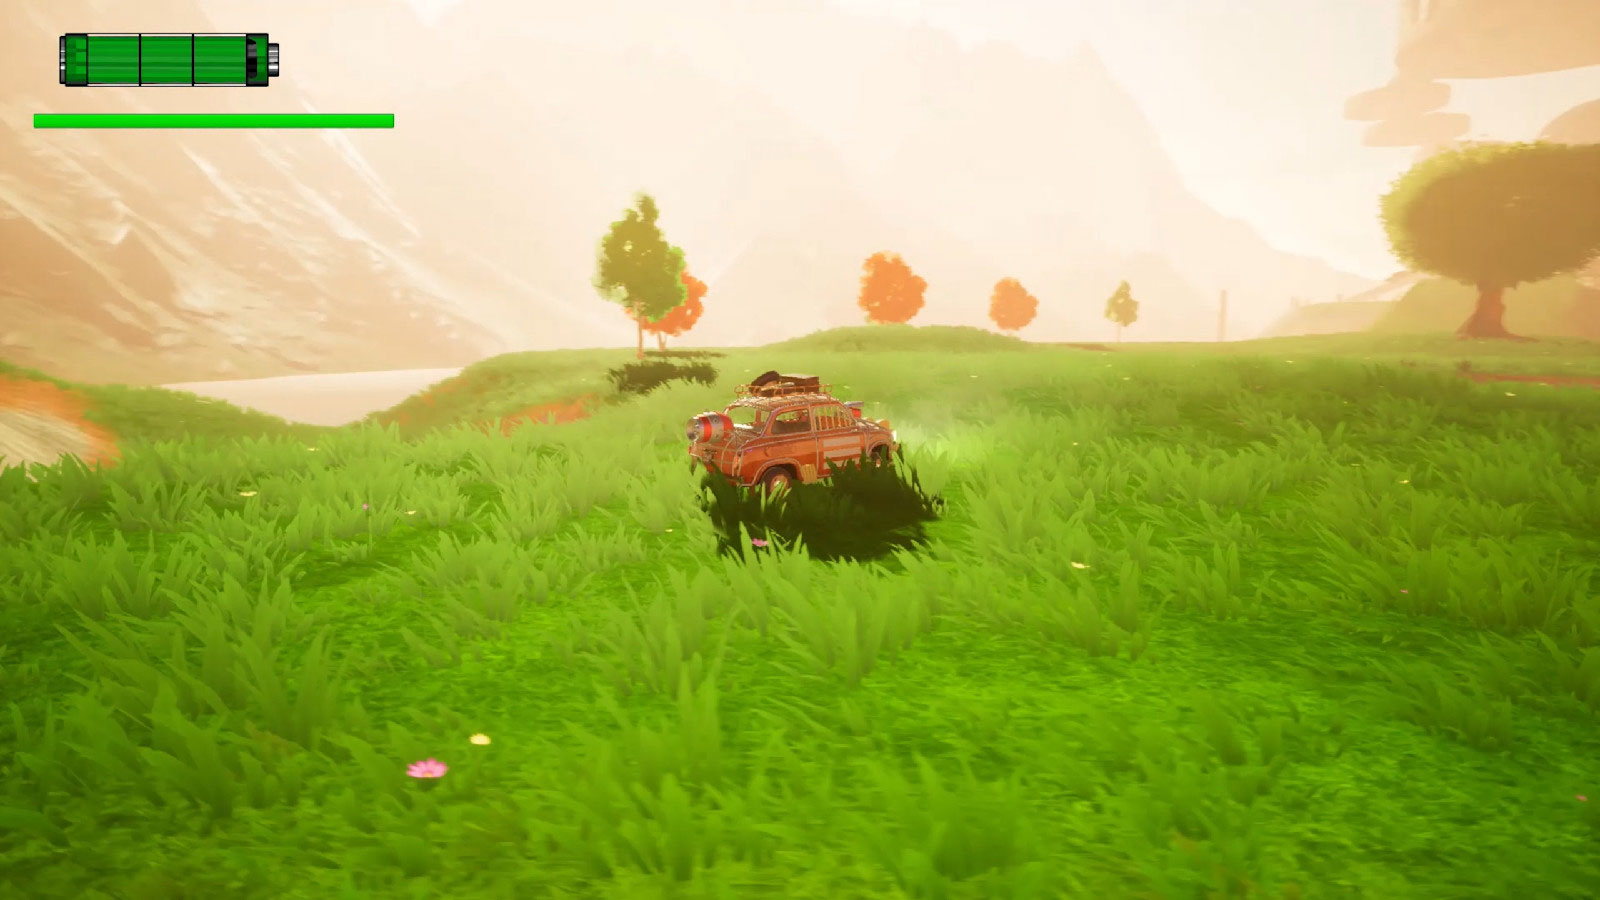 An old car with a rocket on the back sits in a serene pasture